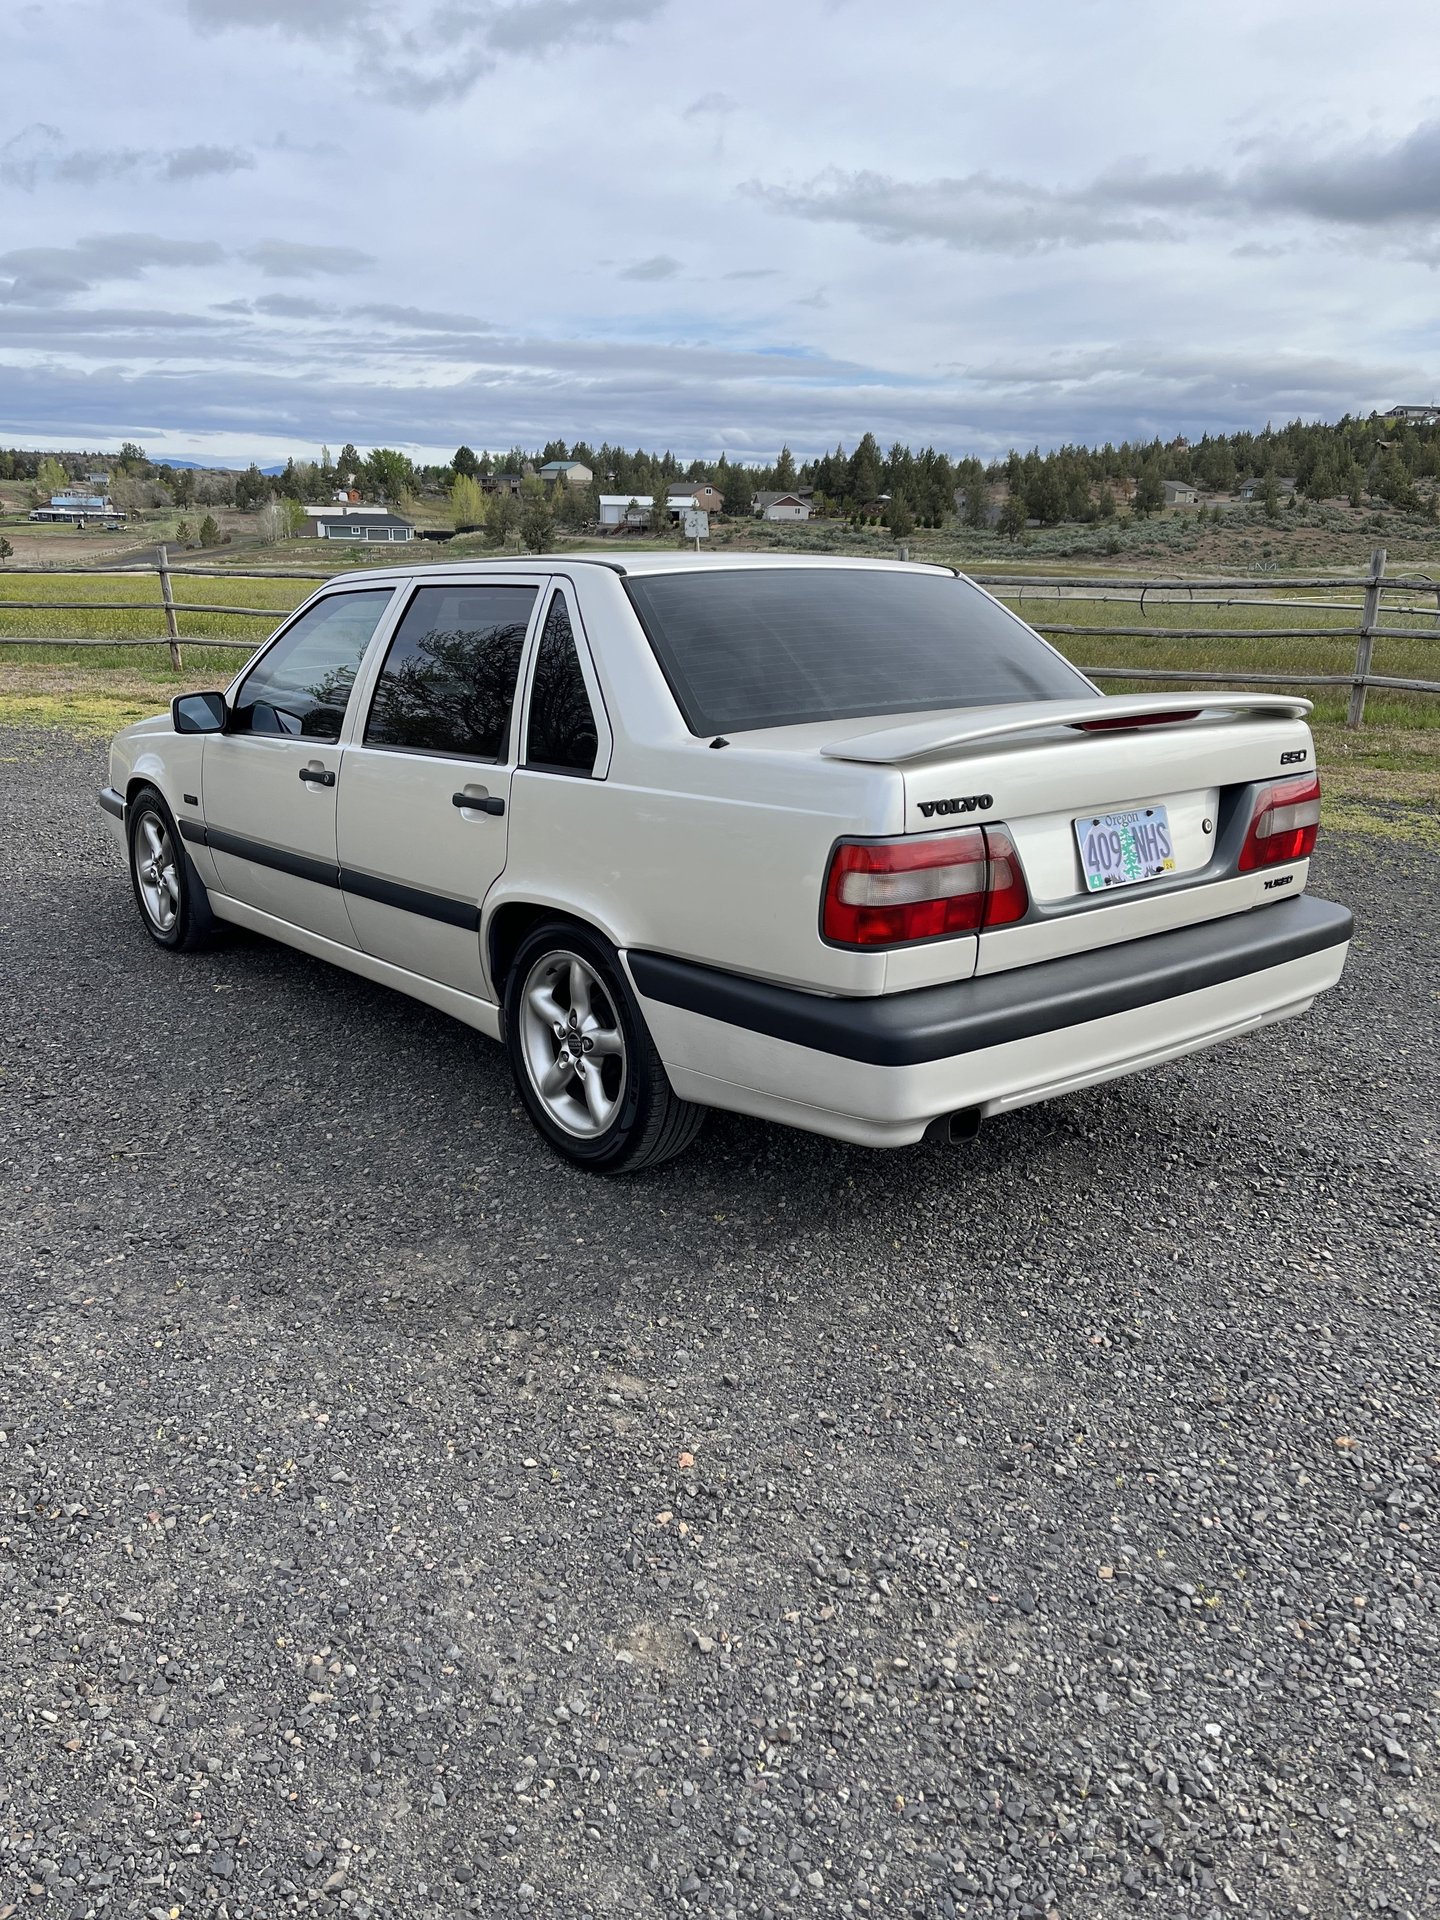 1996 Volvo 850 Turbo Platinum Limited Edition For Sale | SwedeSpeed - Volvo  Performance Forum